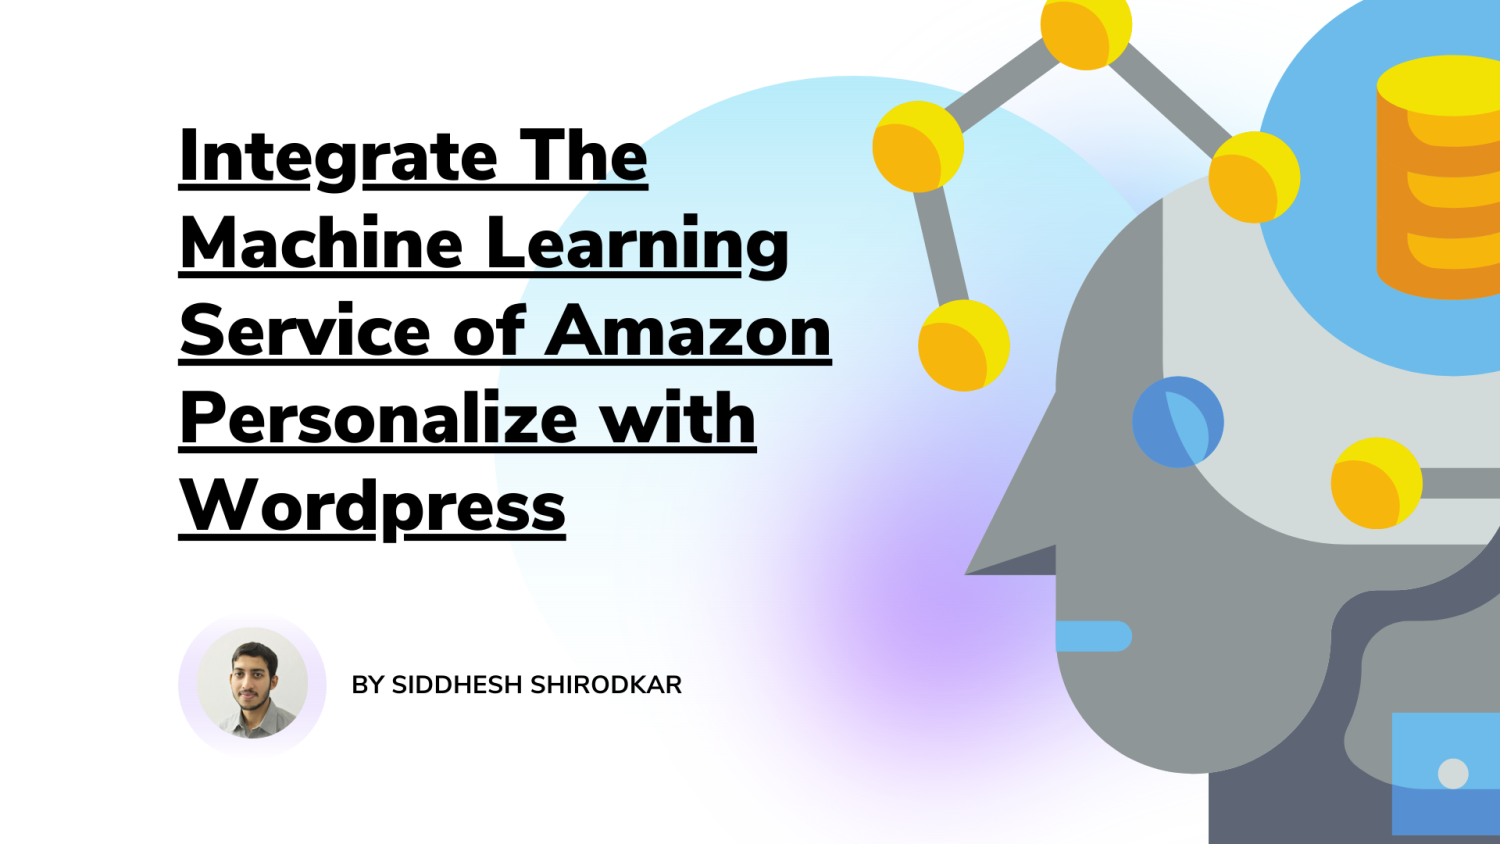 Integrate the machine learning service of amazon personalize with wordpress